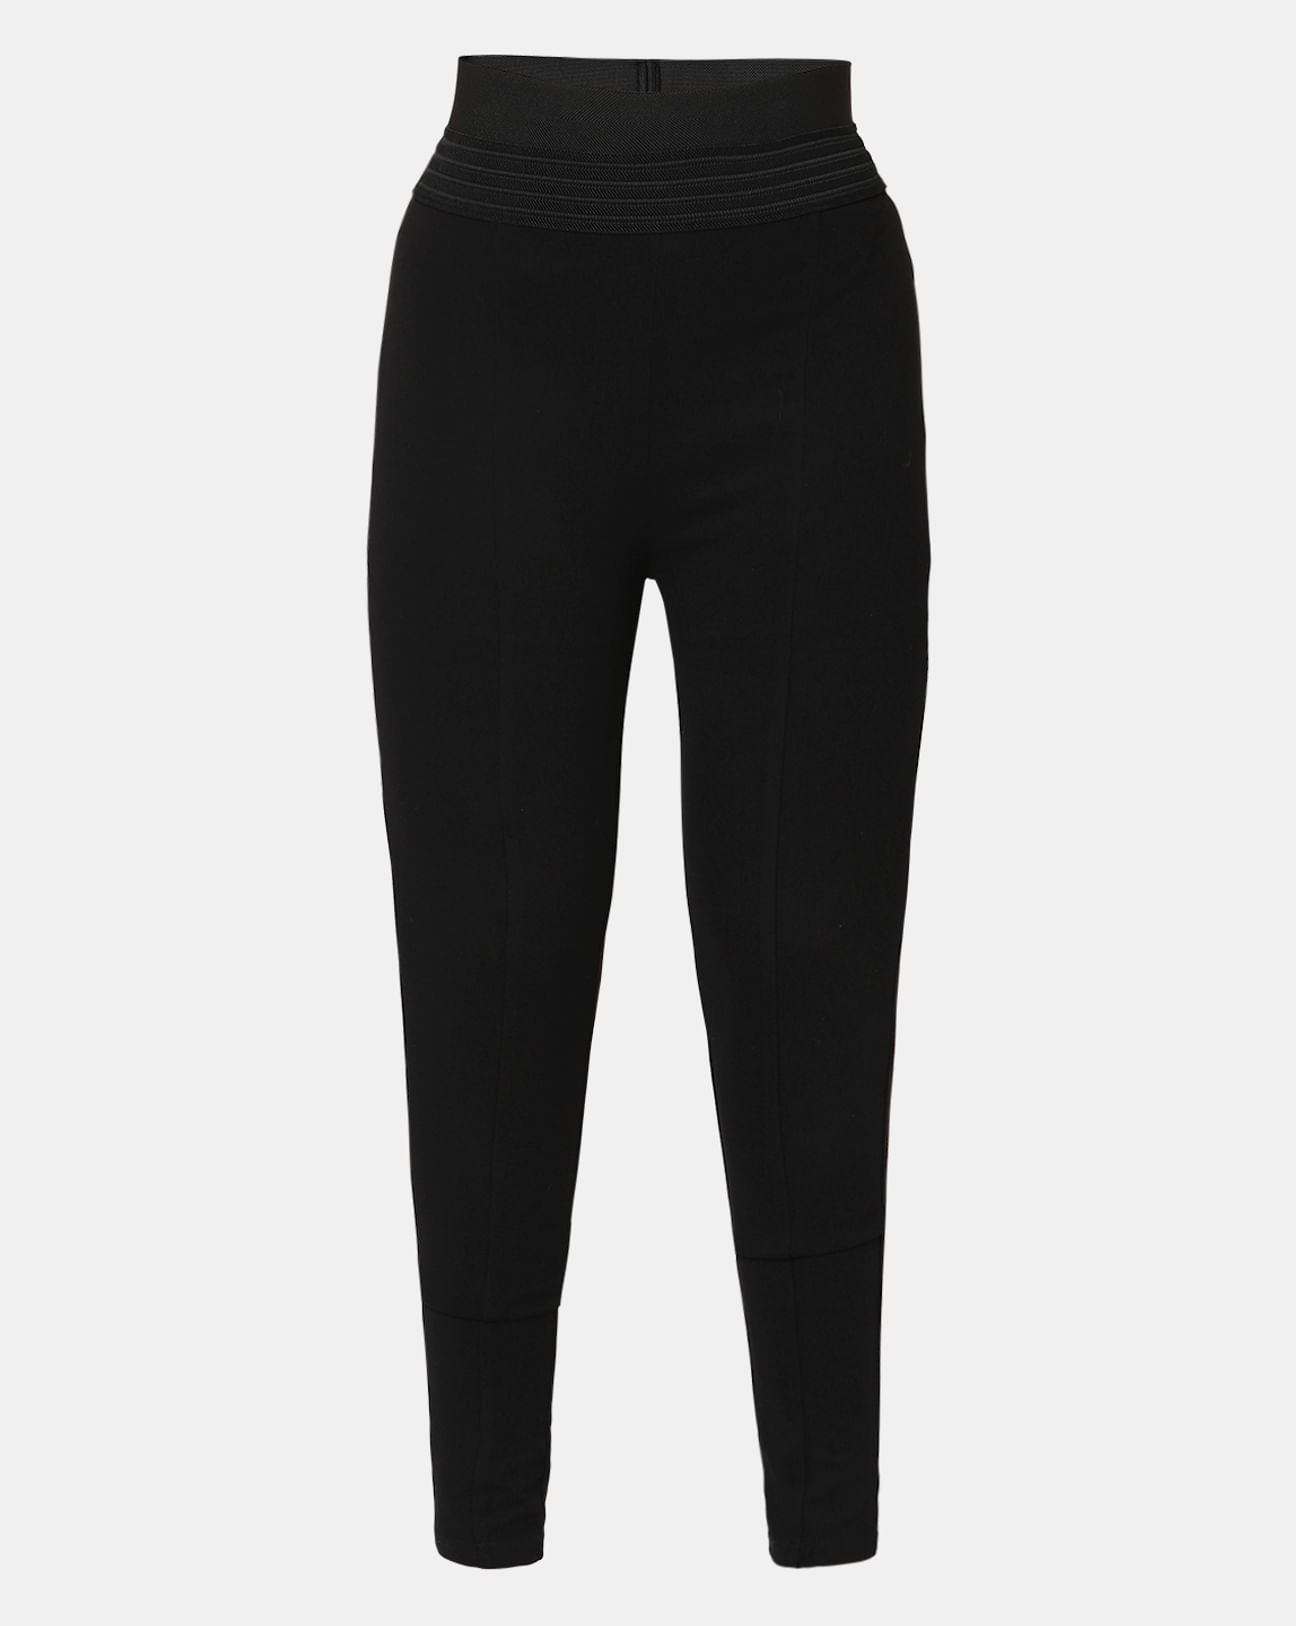 Buy High-Rise Cropped Leggings Online at Best Prices in India - JioMart.